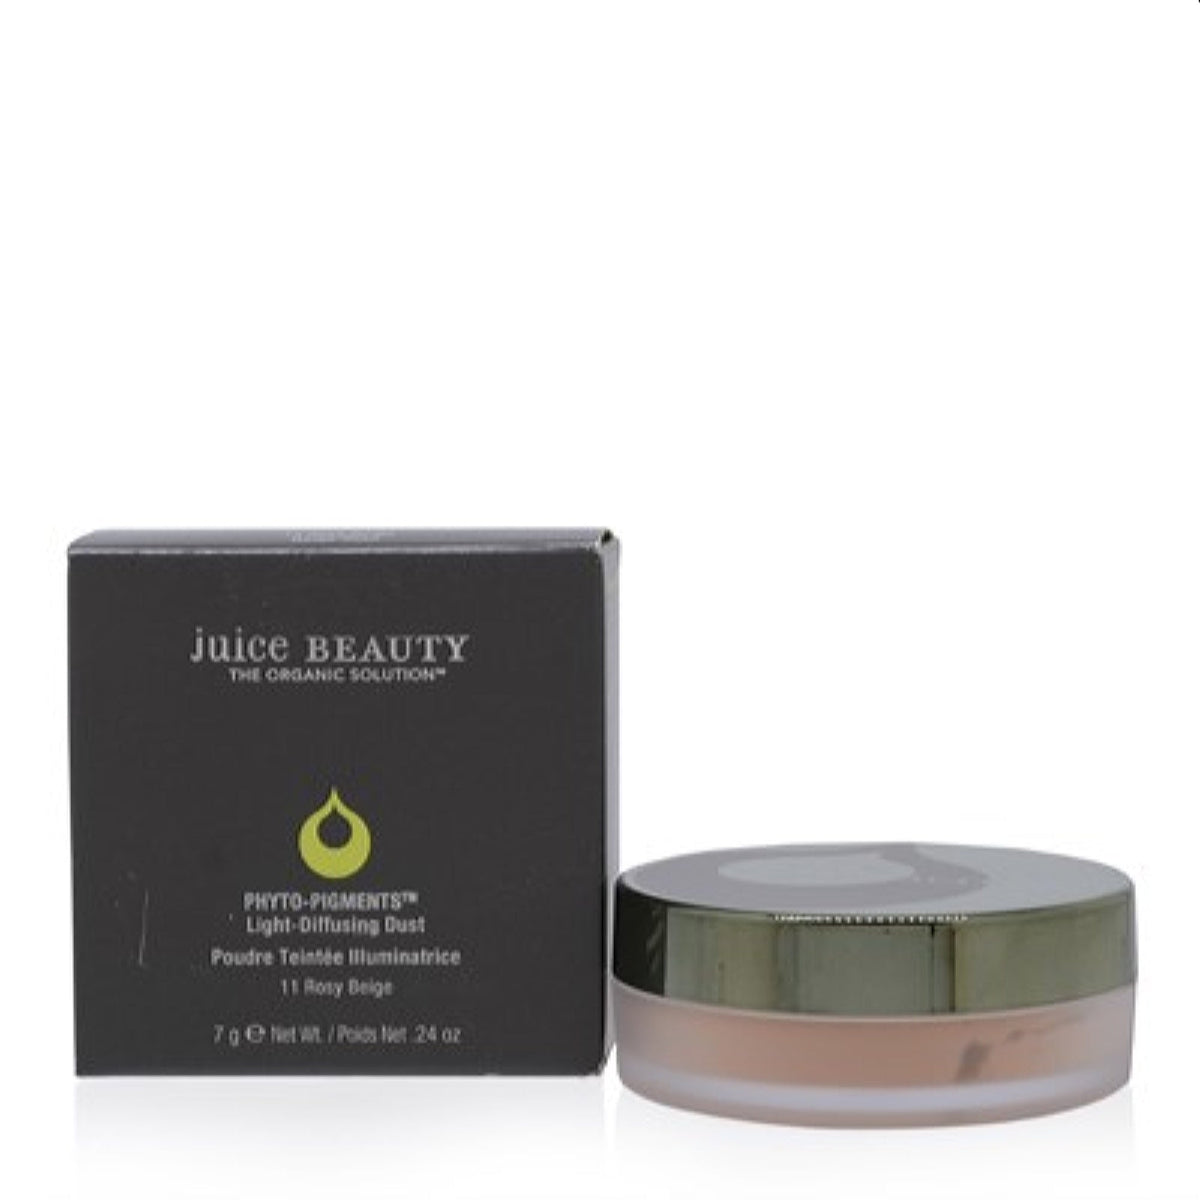 Juice Beauty Phyto-Pigments Light-Diffusing Dust (11-Rosy Beige) 0.24 Oz 7 Gr  